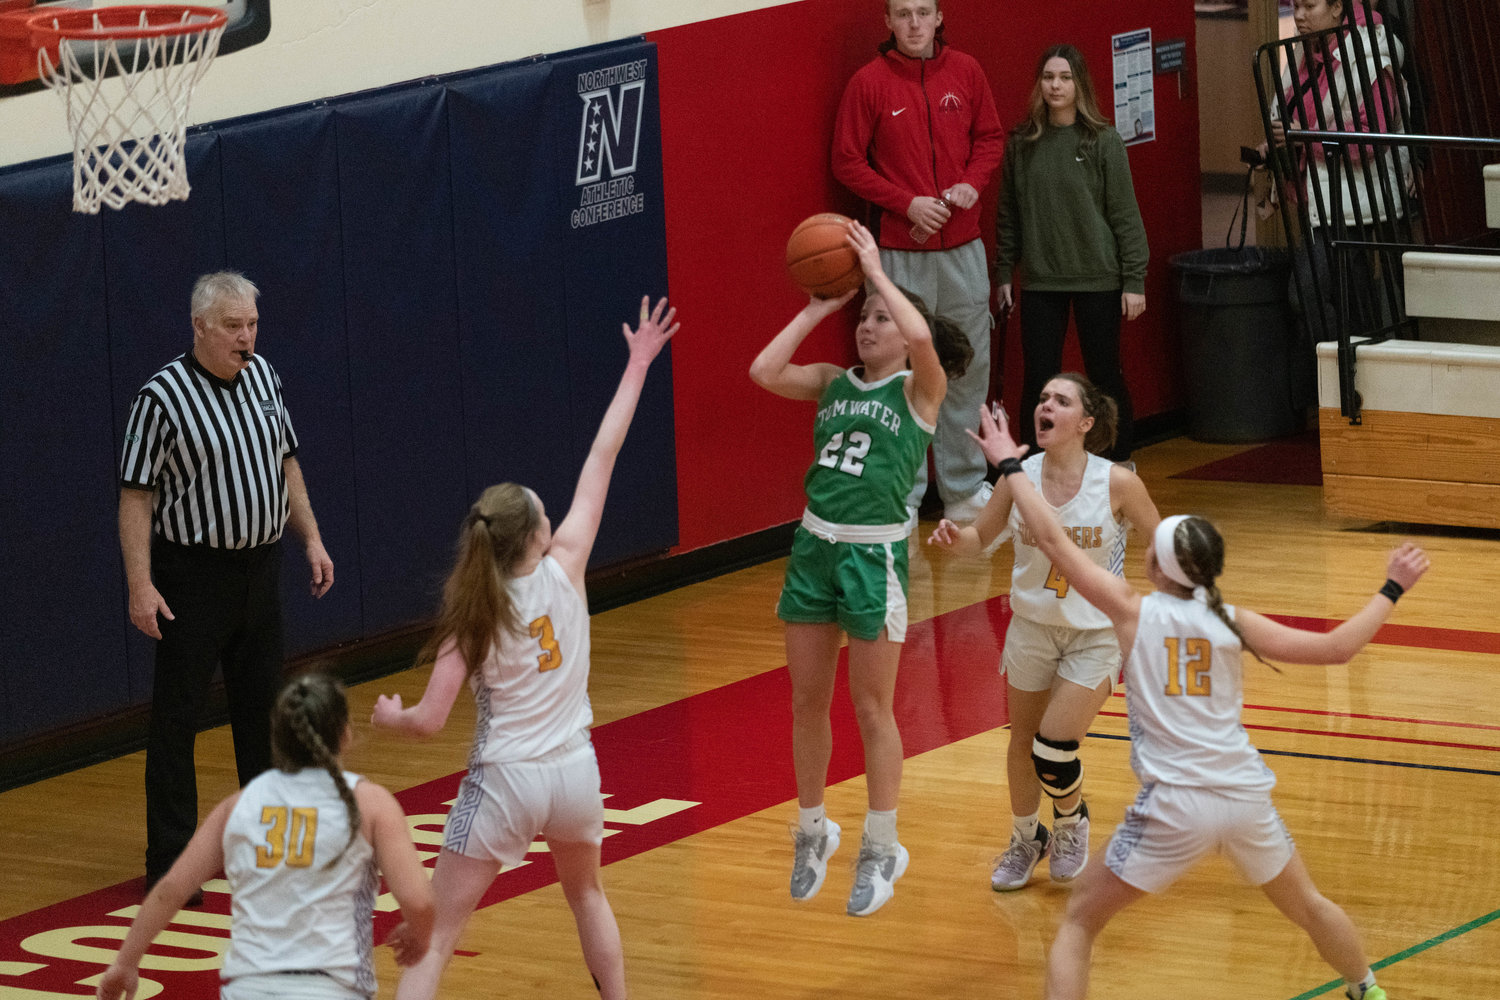 Regan Brewer puts up a jumper during Tumwater's 39-25 win over Kelso on Jan. 16 at the LCC MLK Day Classic in Longview.